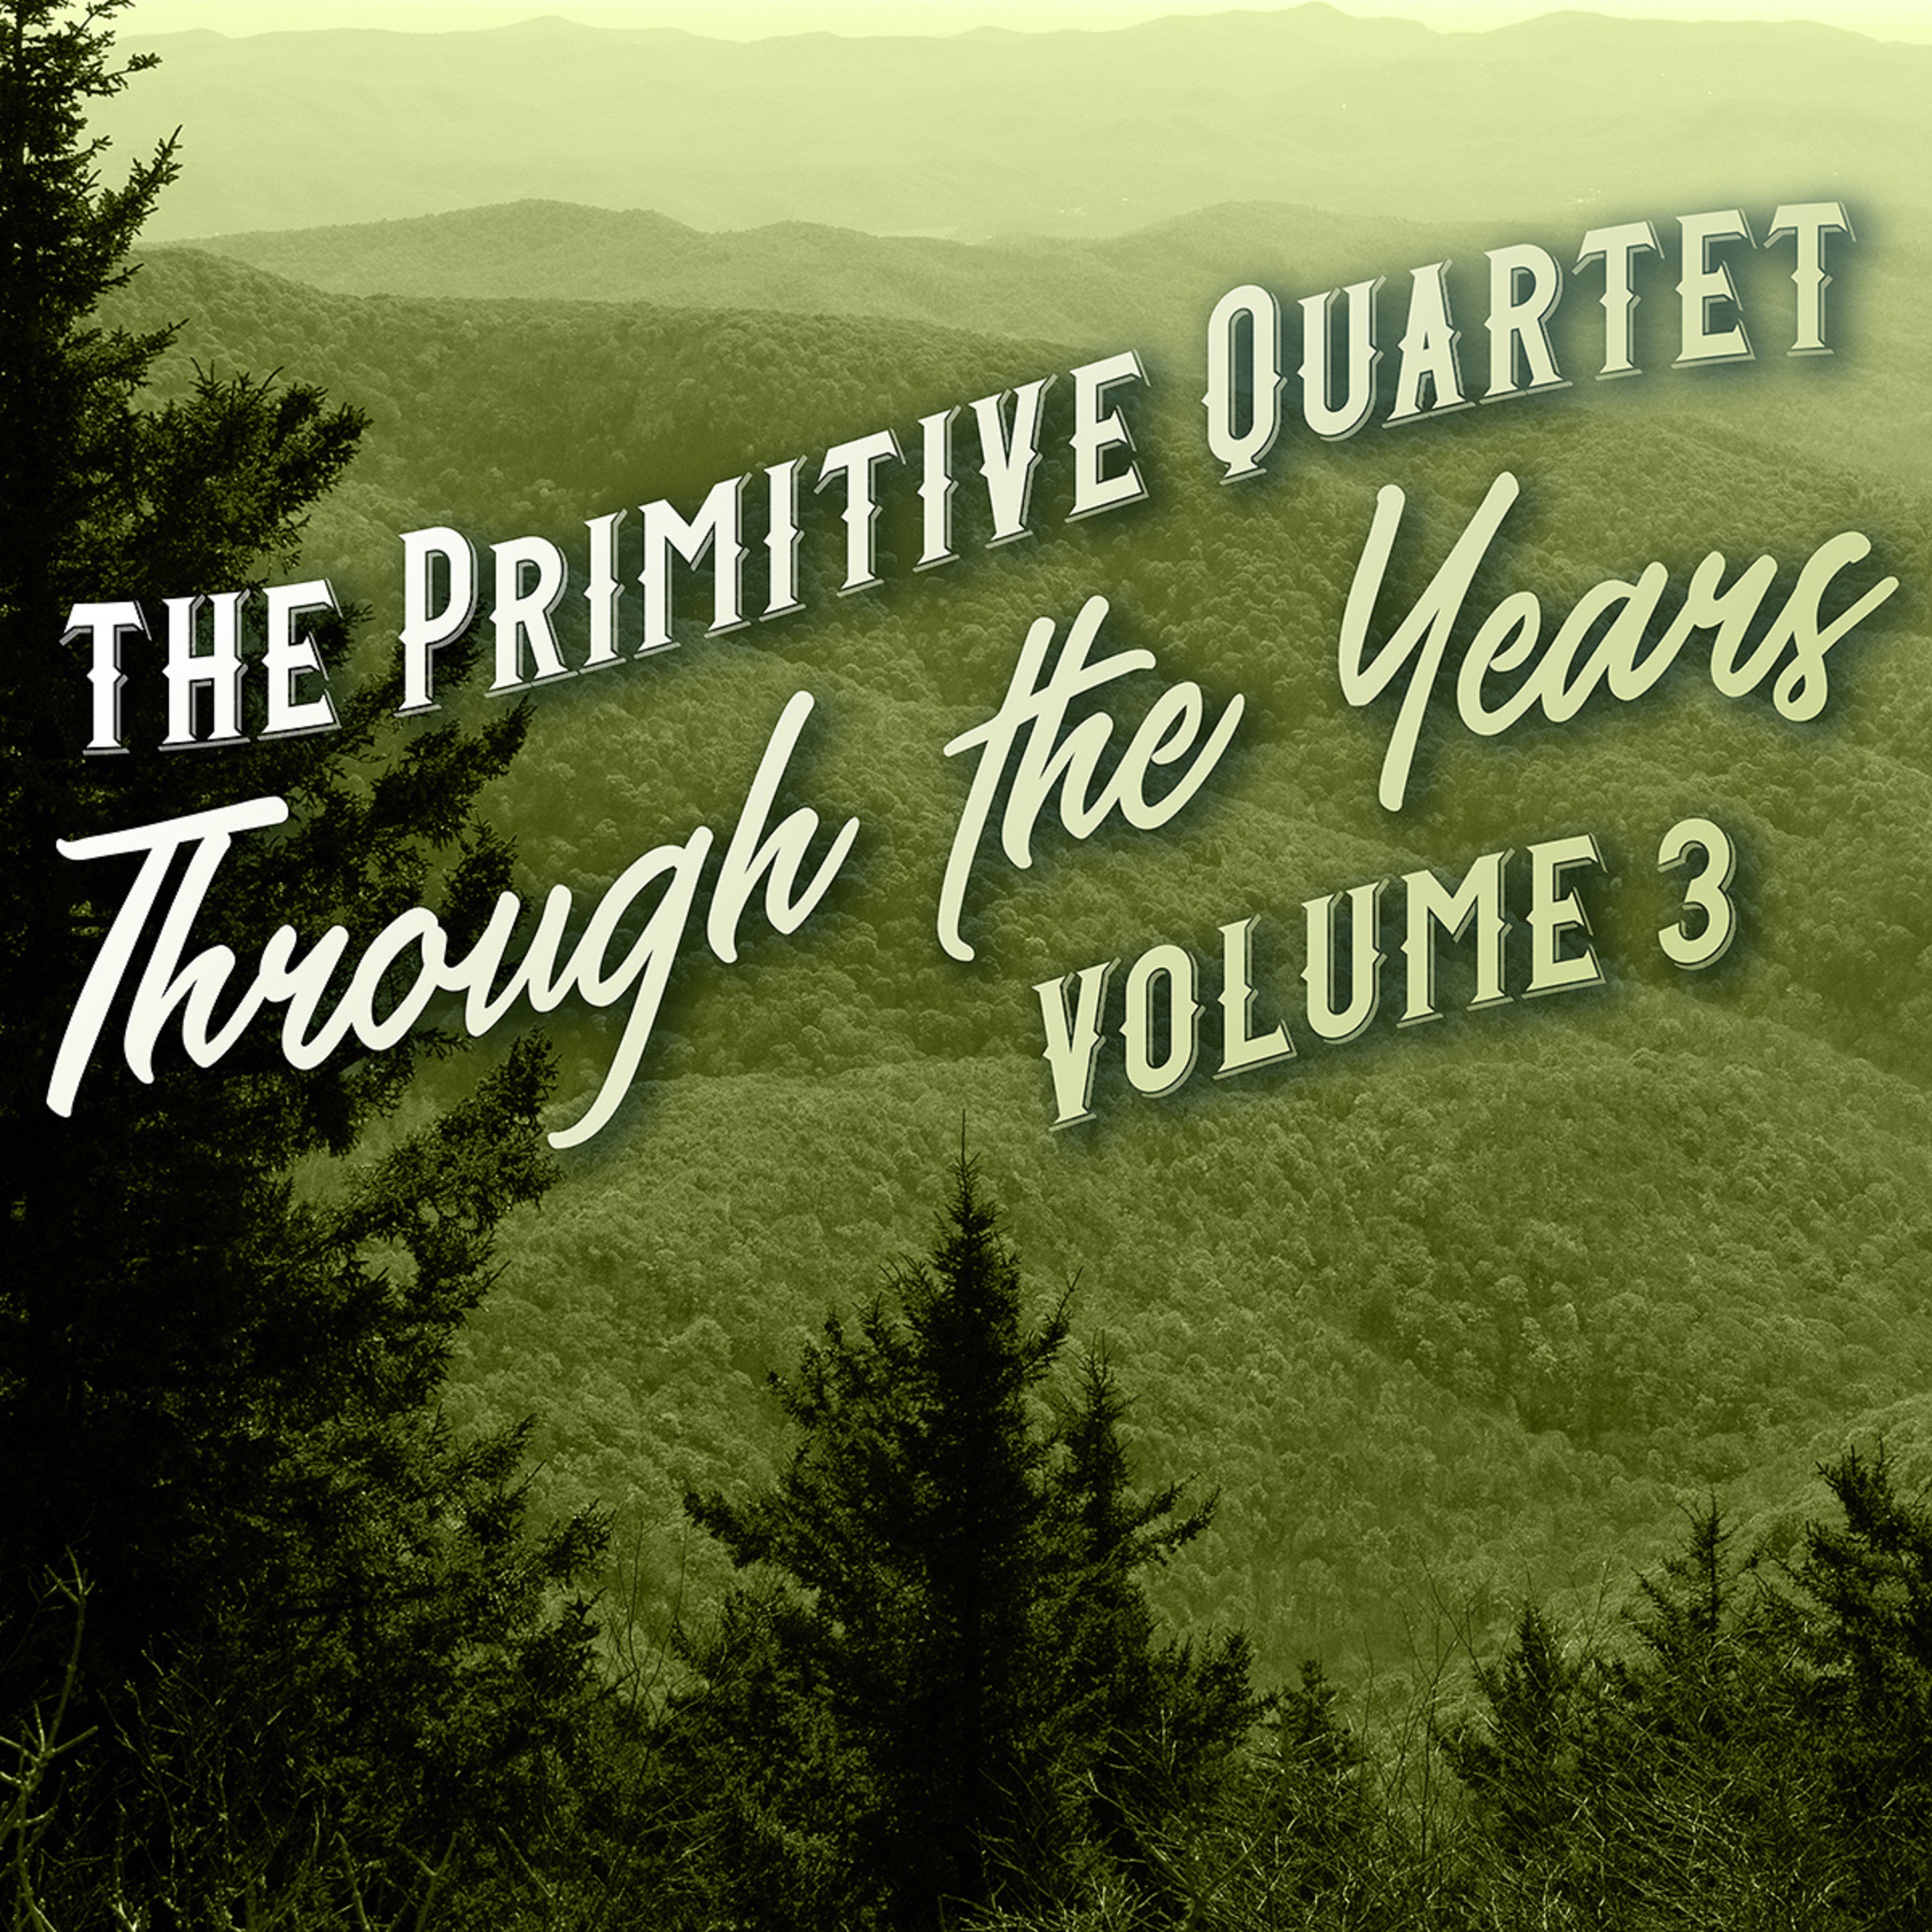 The Primitive Quartet’s Through The Years series continues with Volume 3